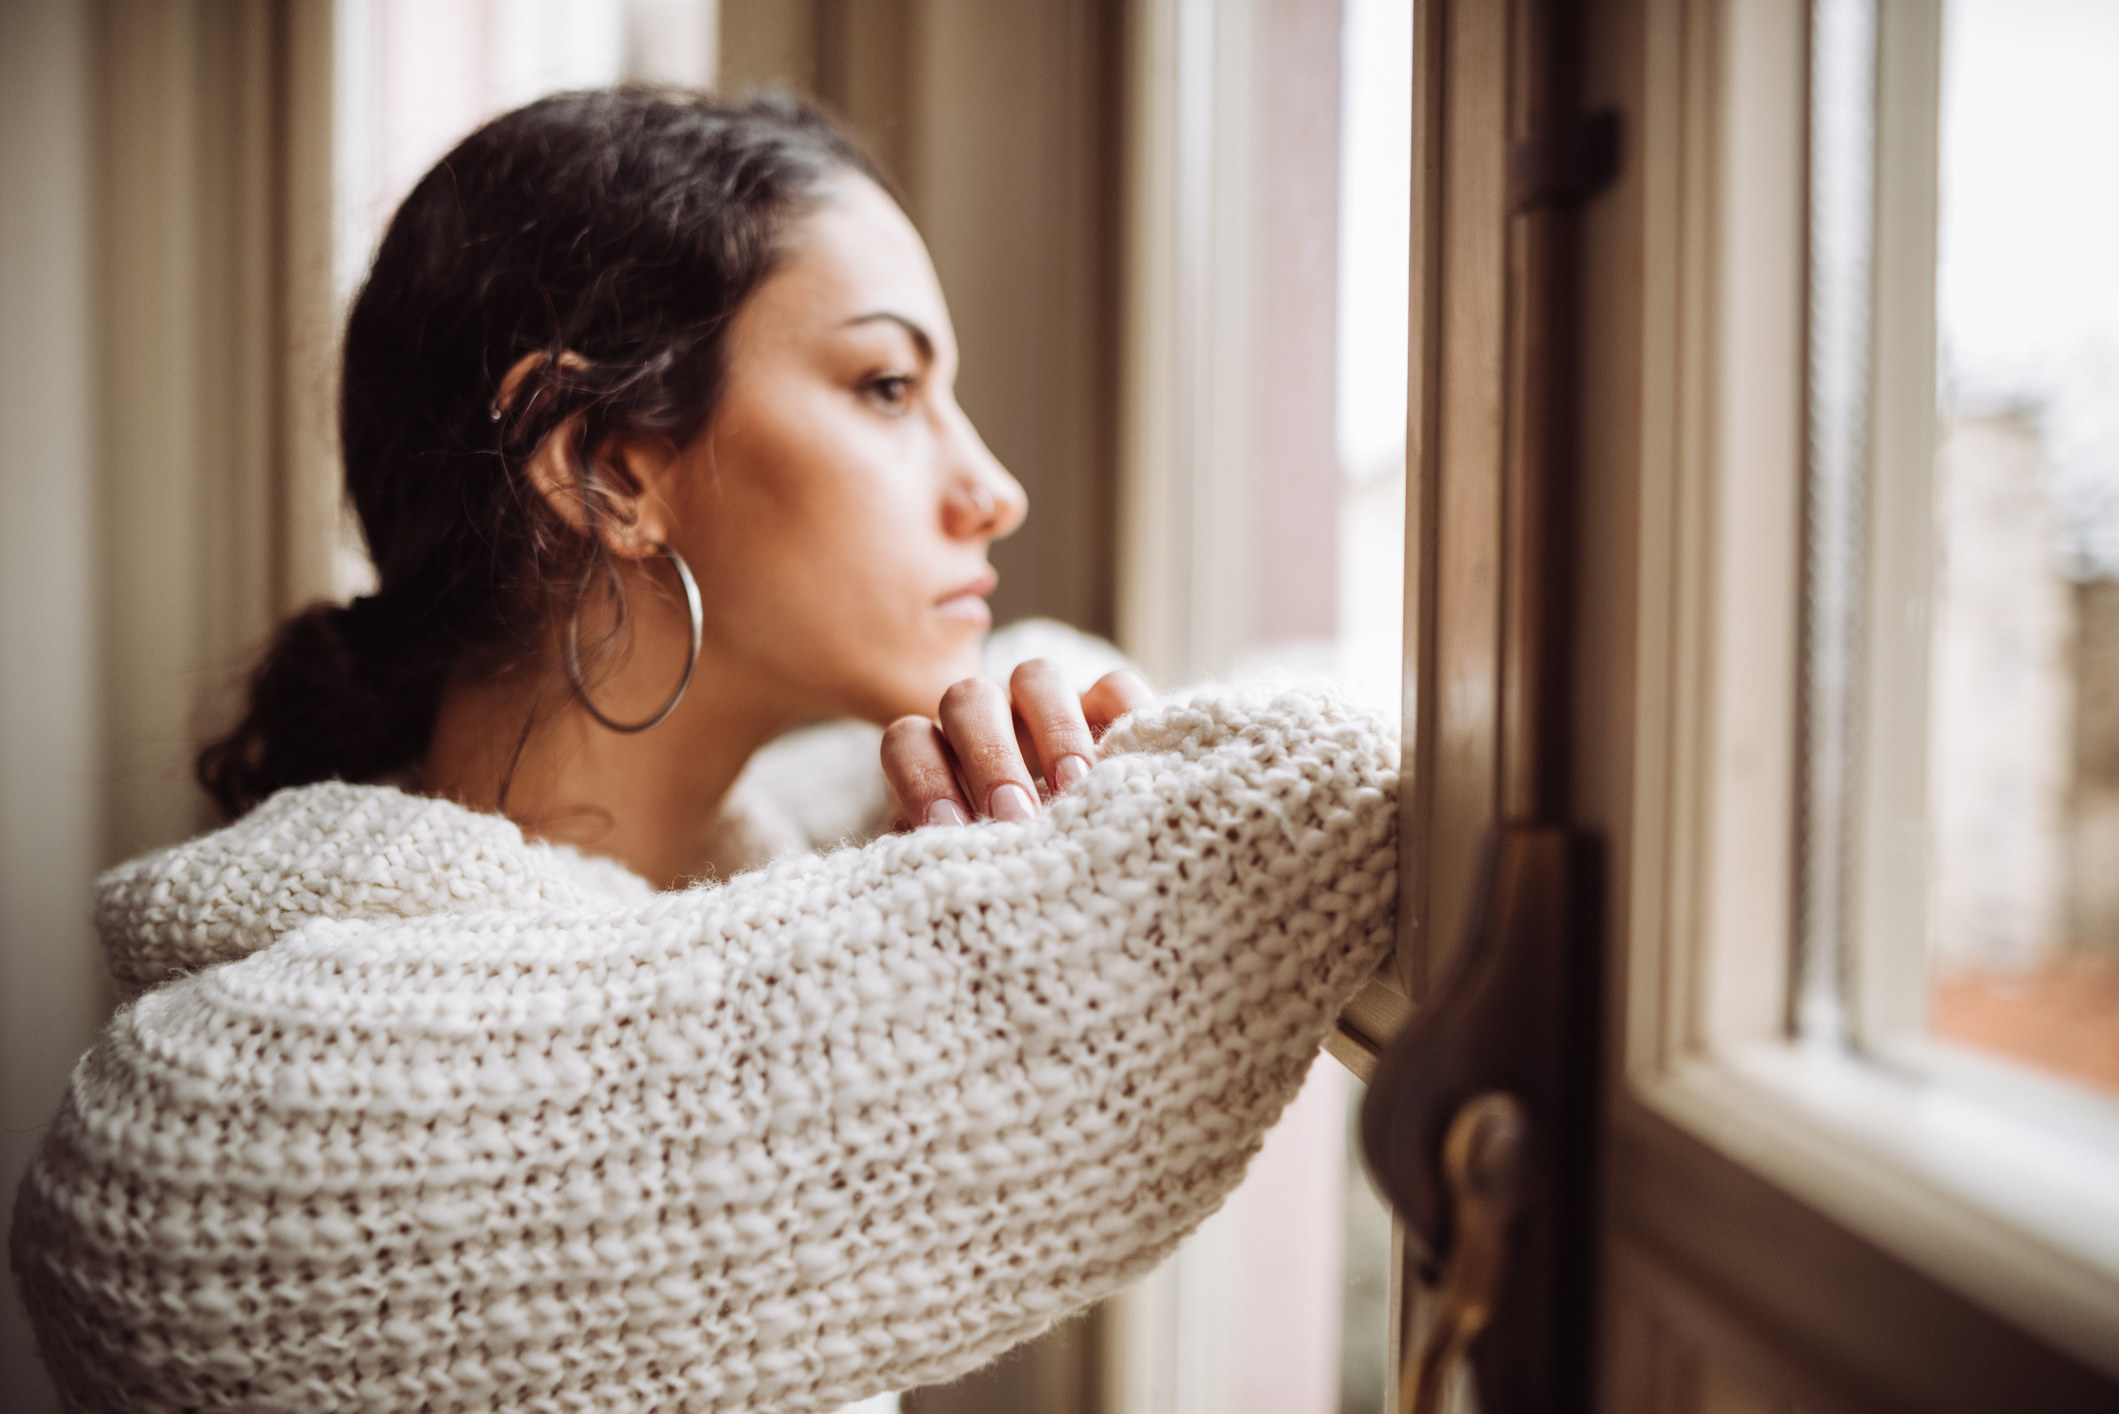 A young woman looking out the window